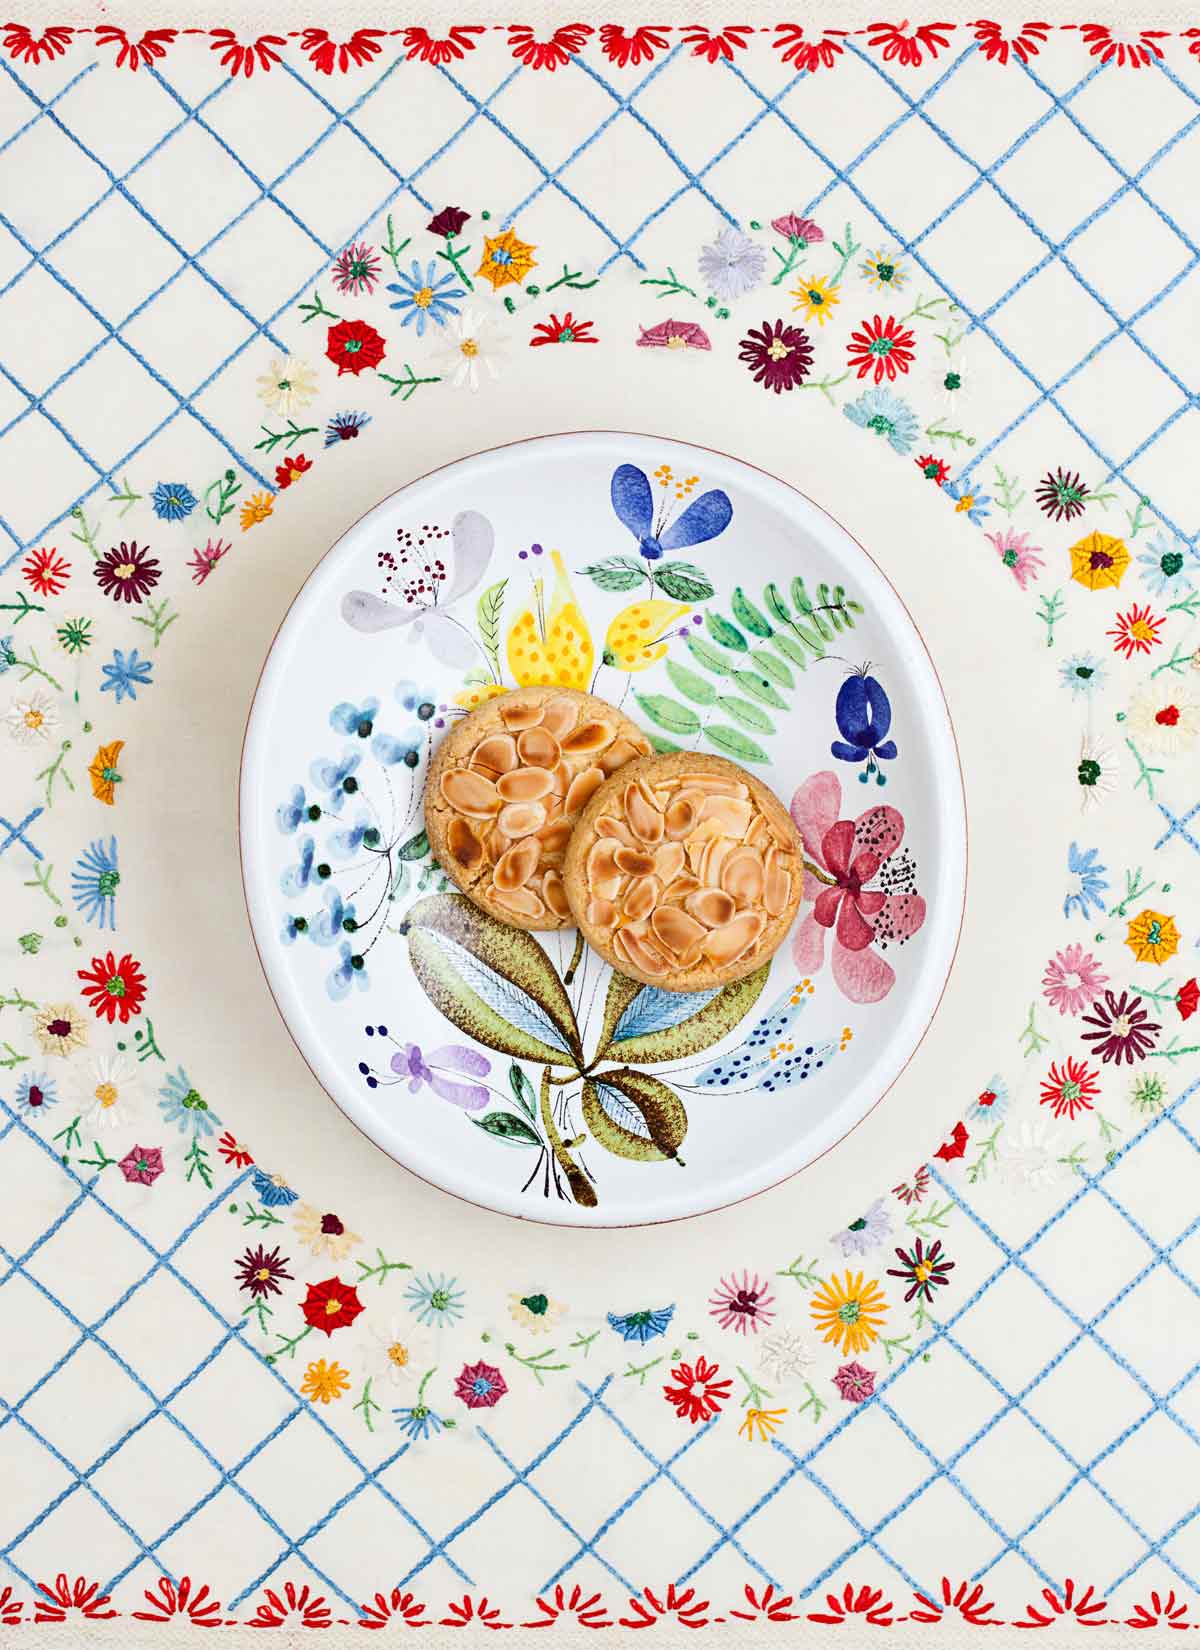 Two almond-topped cookies made by Cenk Sönmezsoy on a decorative plate and cloth.